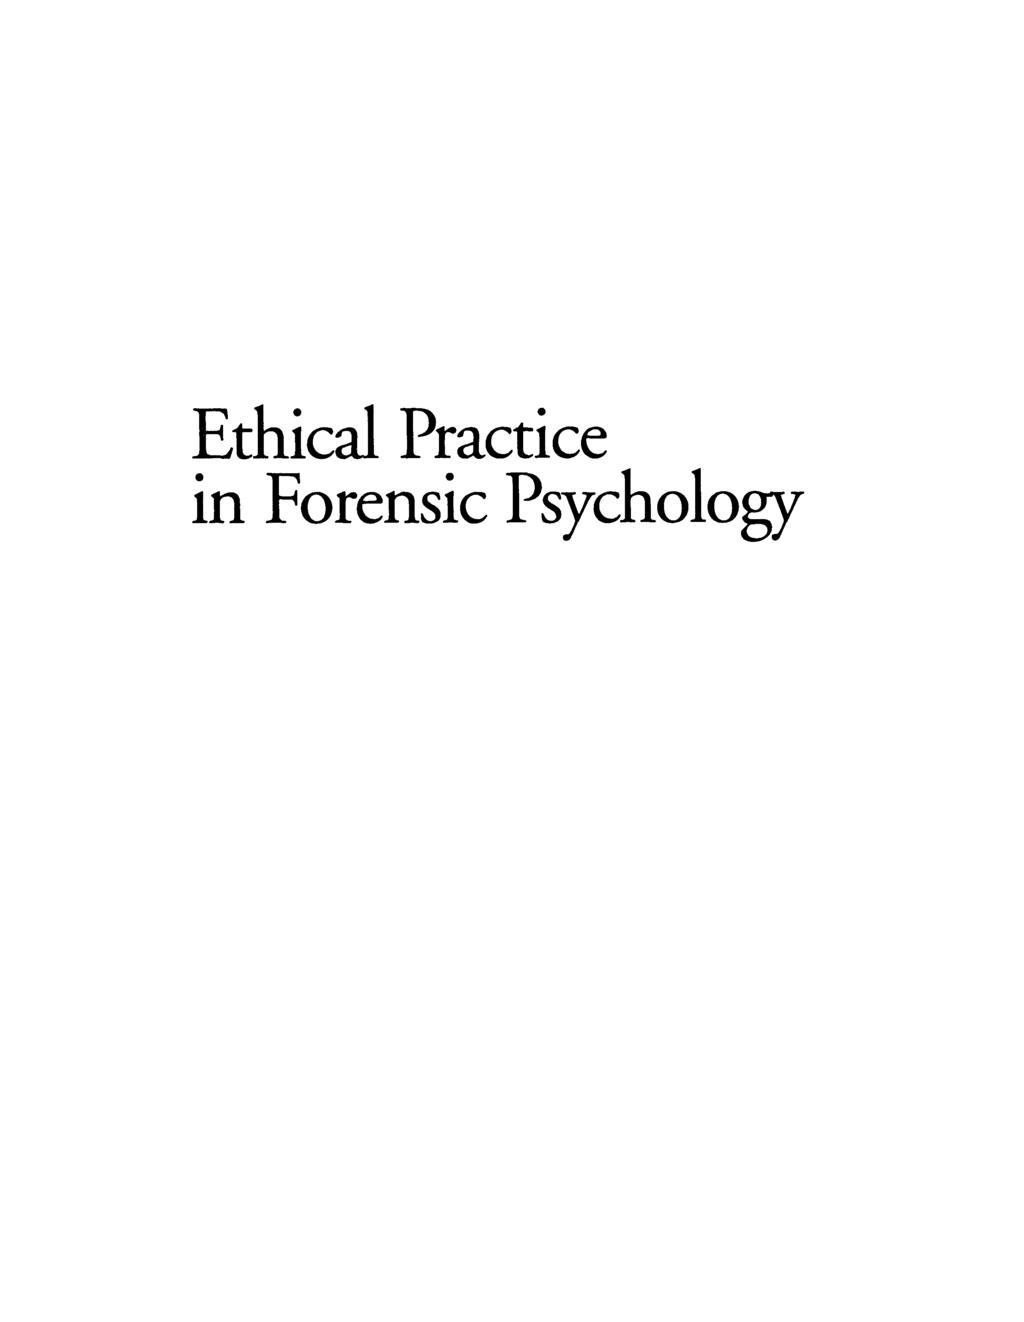 Ethical Practice in